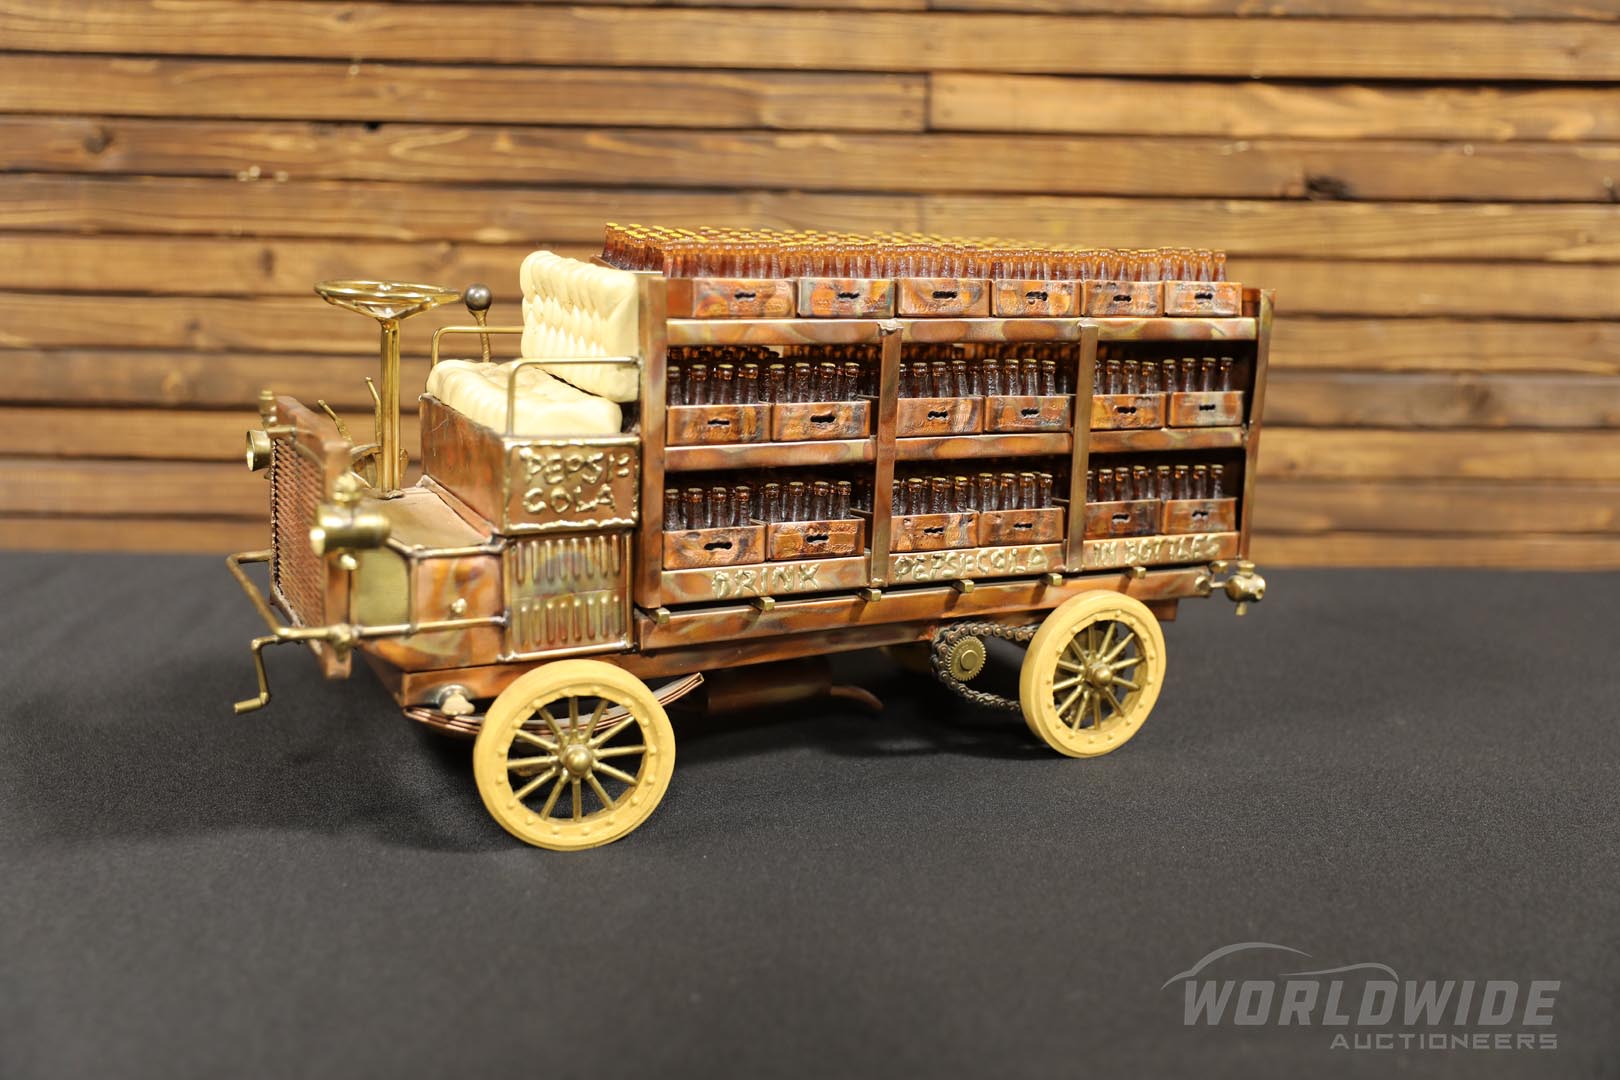  Sculpture of 1905 Autocar Peps i-Cola Truck by C. Hess 